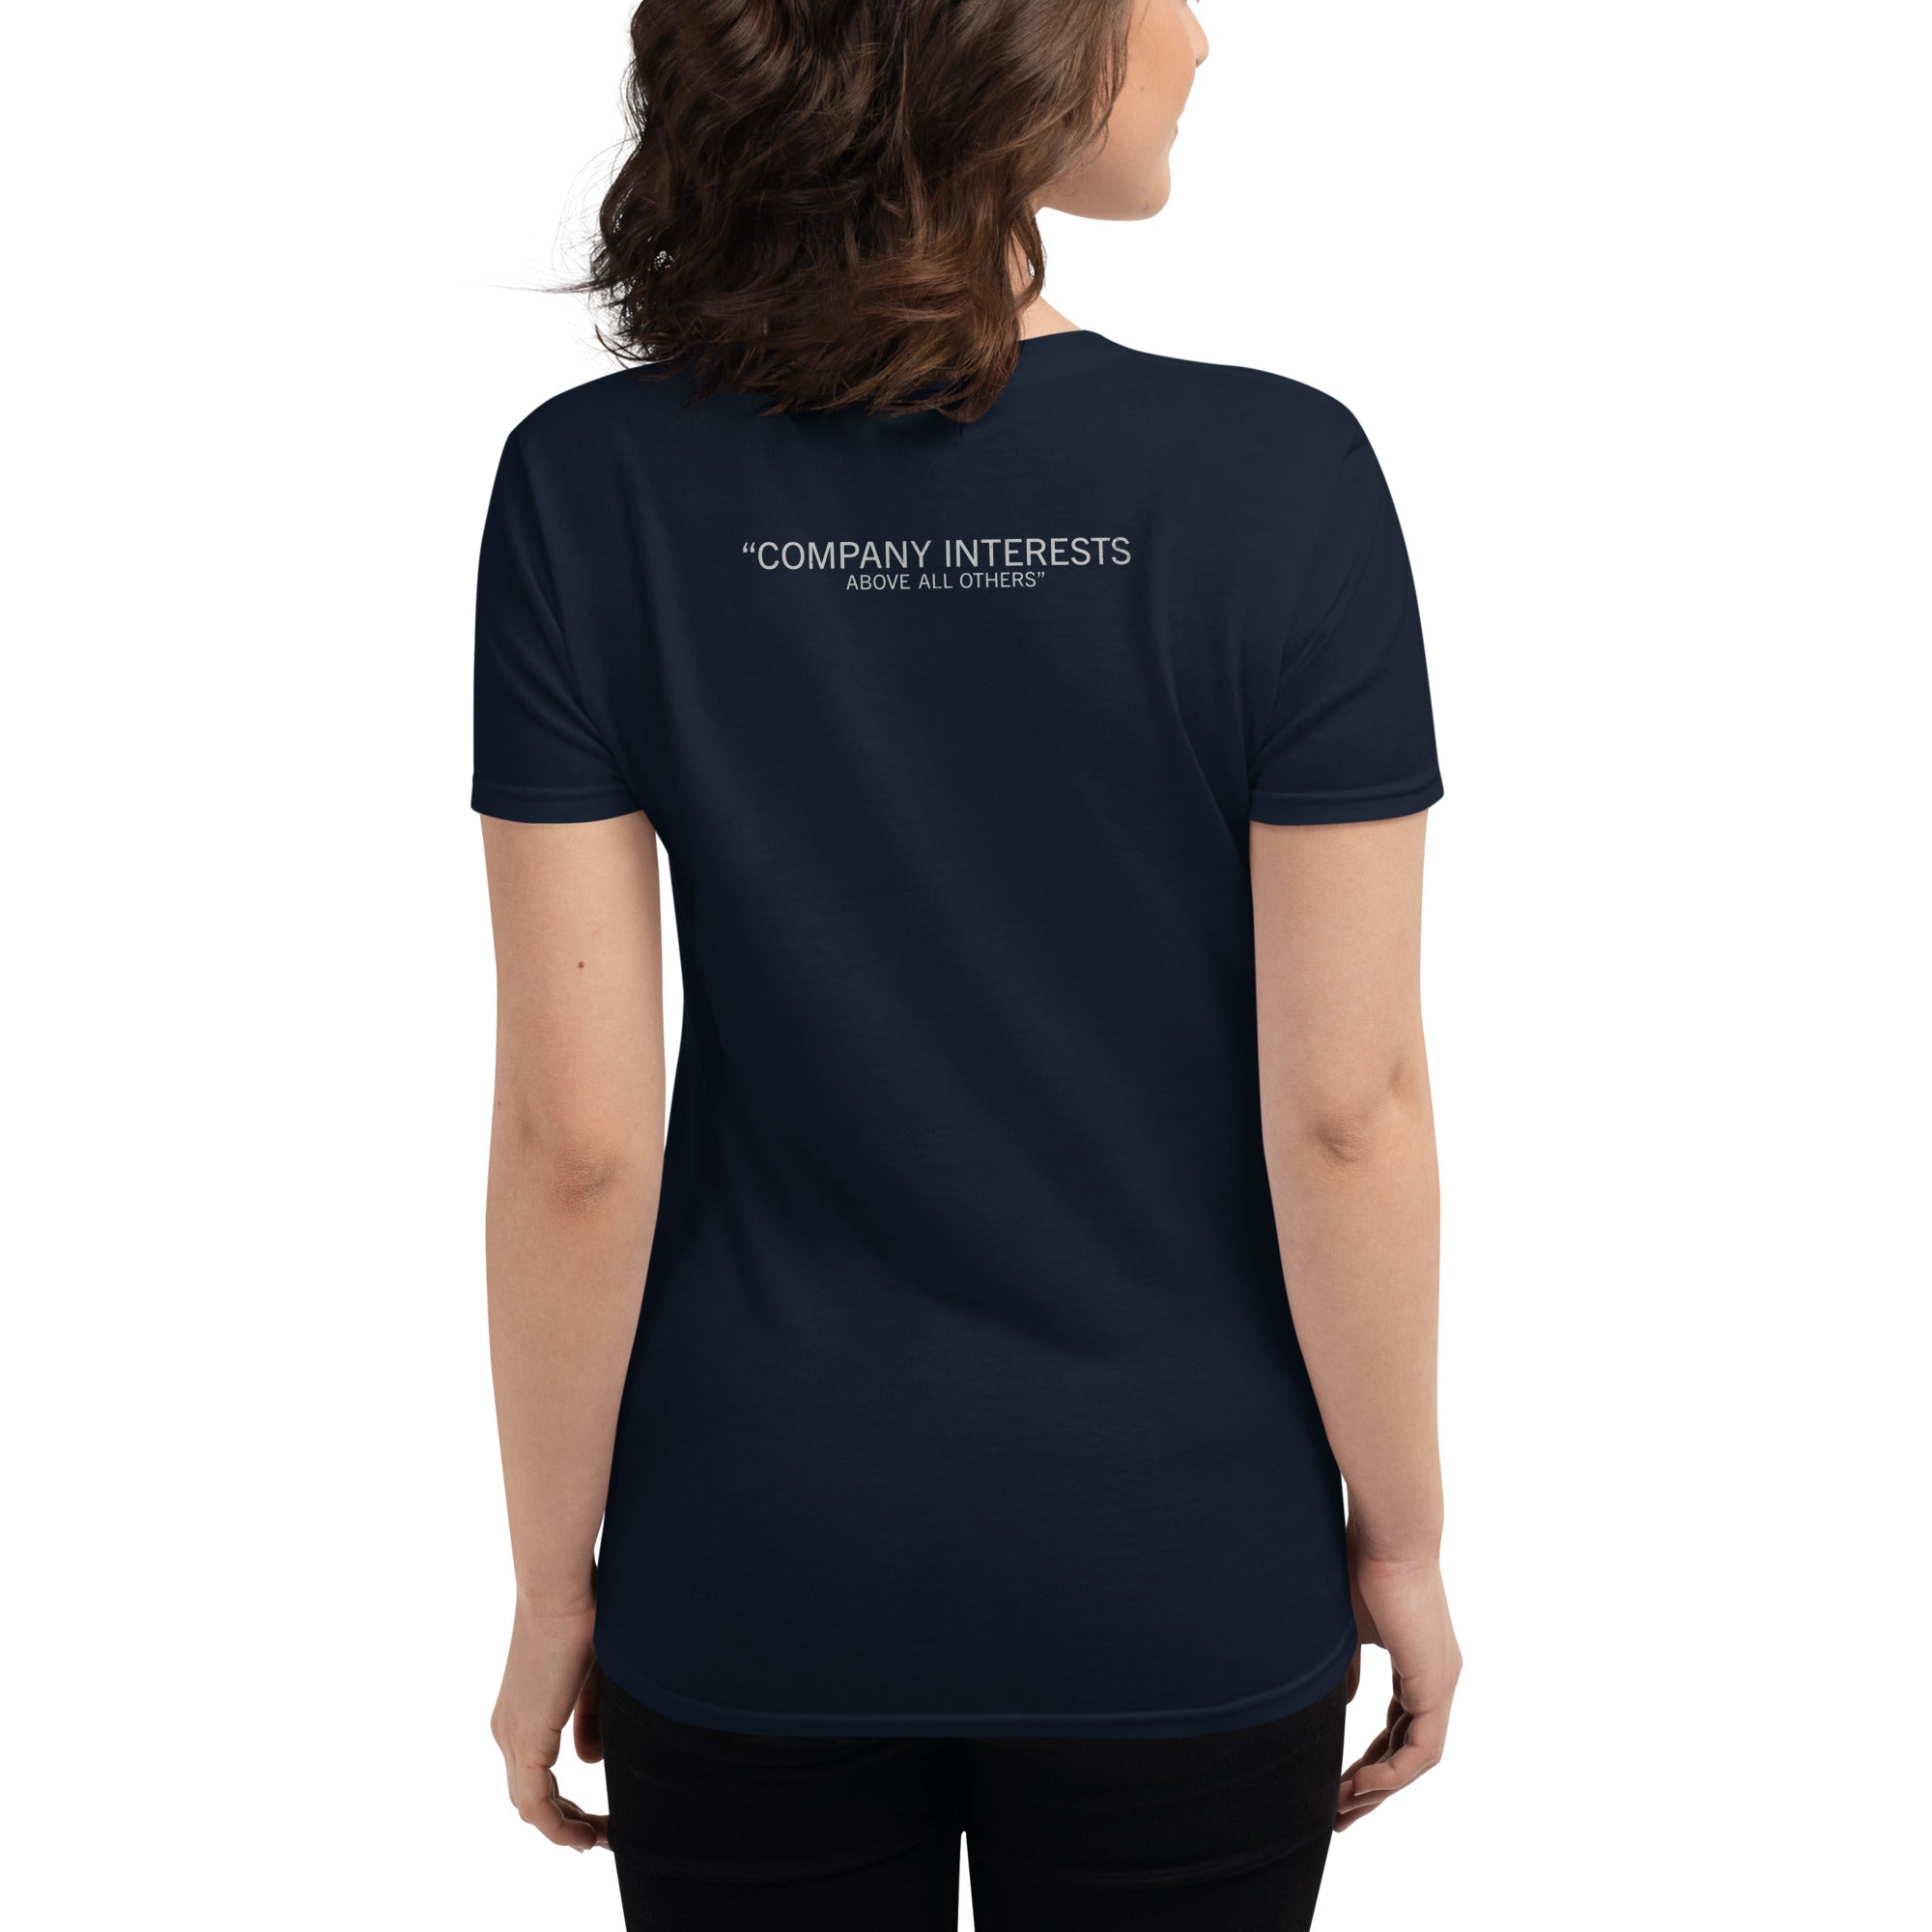 Women's "Company Interests Above All Others" T-Shirt